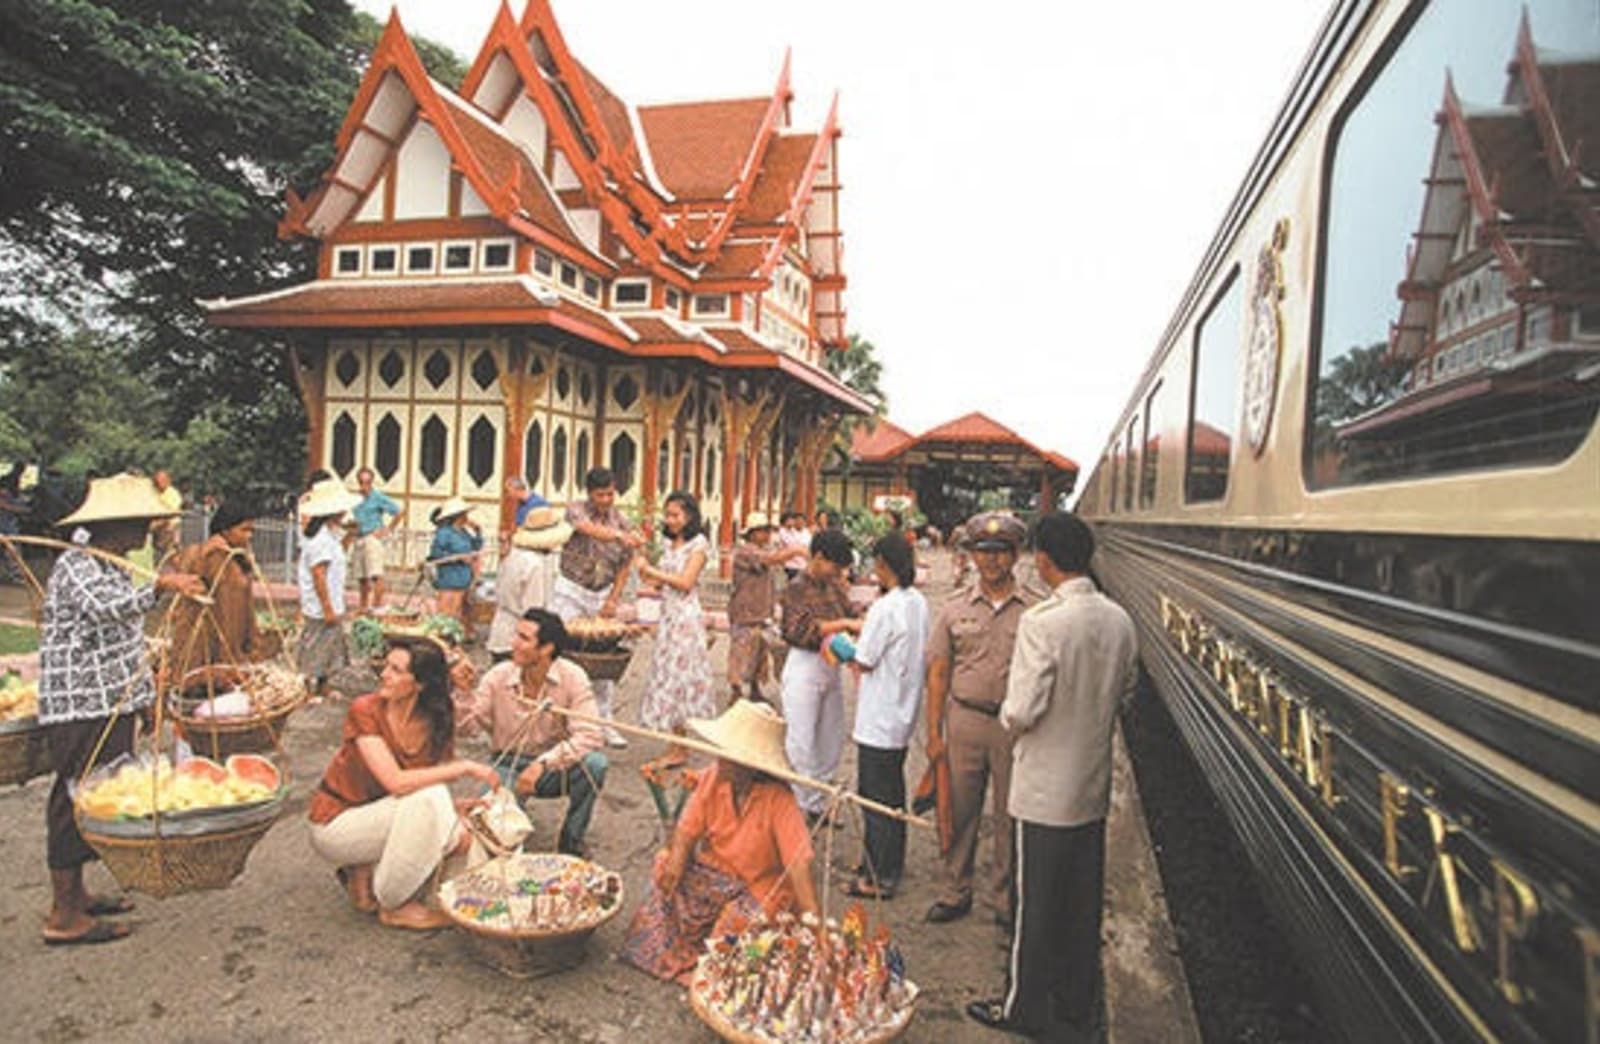 RS-The-Eastern-Oriental-Express-The-Eastern-Oriental-Express-in-Hua-Hin-StationThailand.jpg